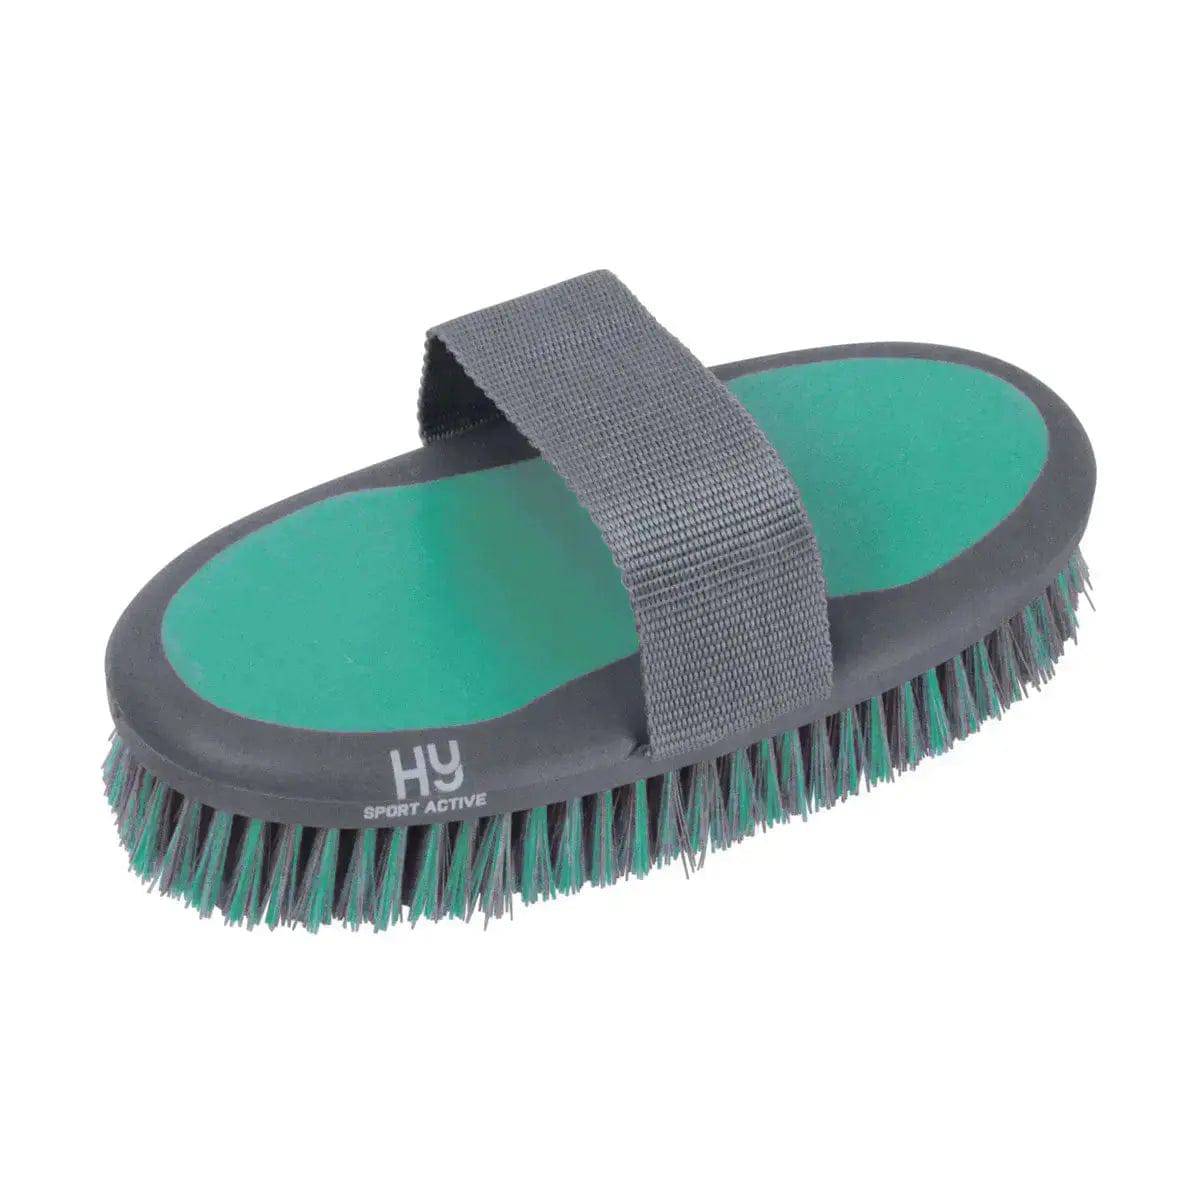 Hy Sport Active Sponge Brush Spearmint Green HY Equestrian Brushes & Combs Barnstaple Equestrian Supplies